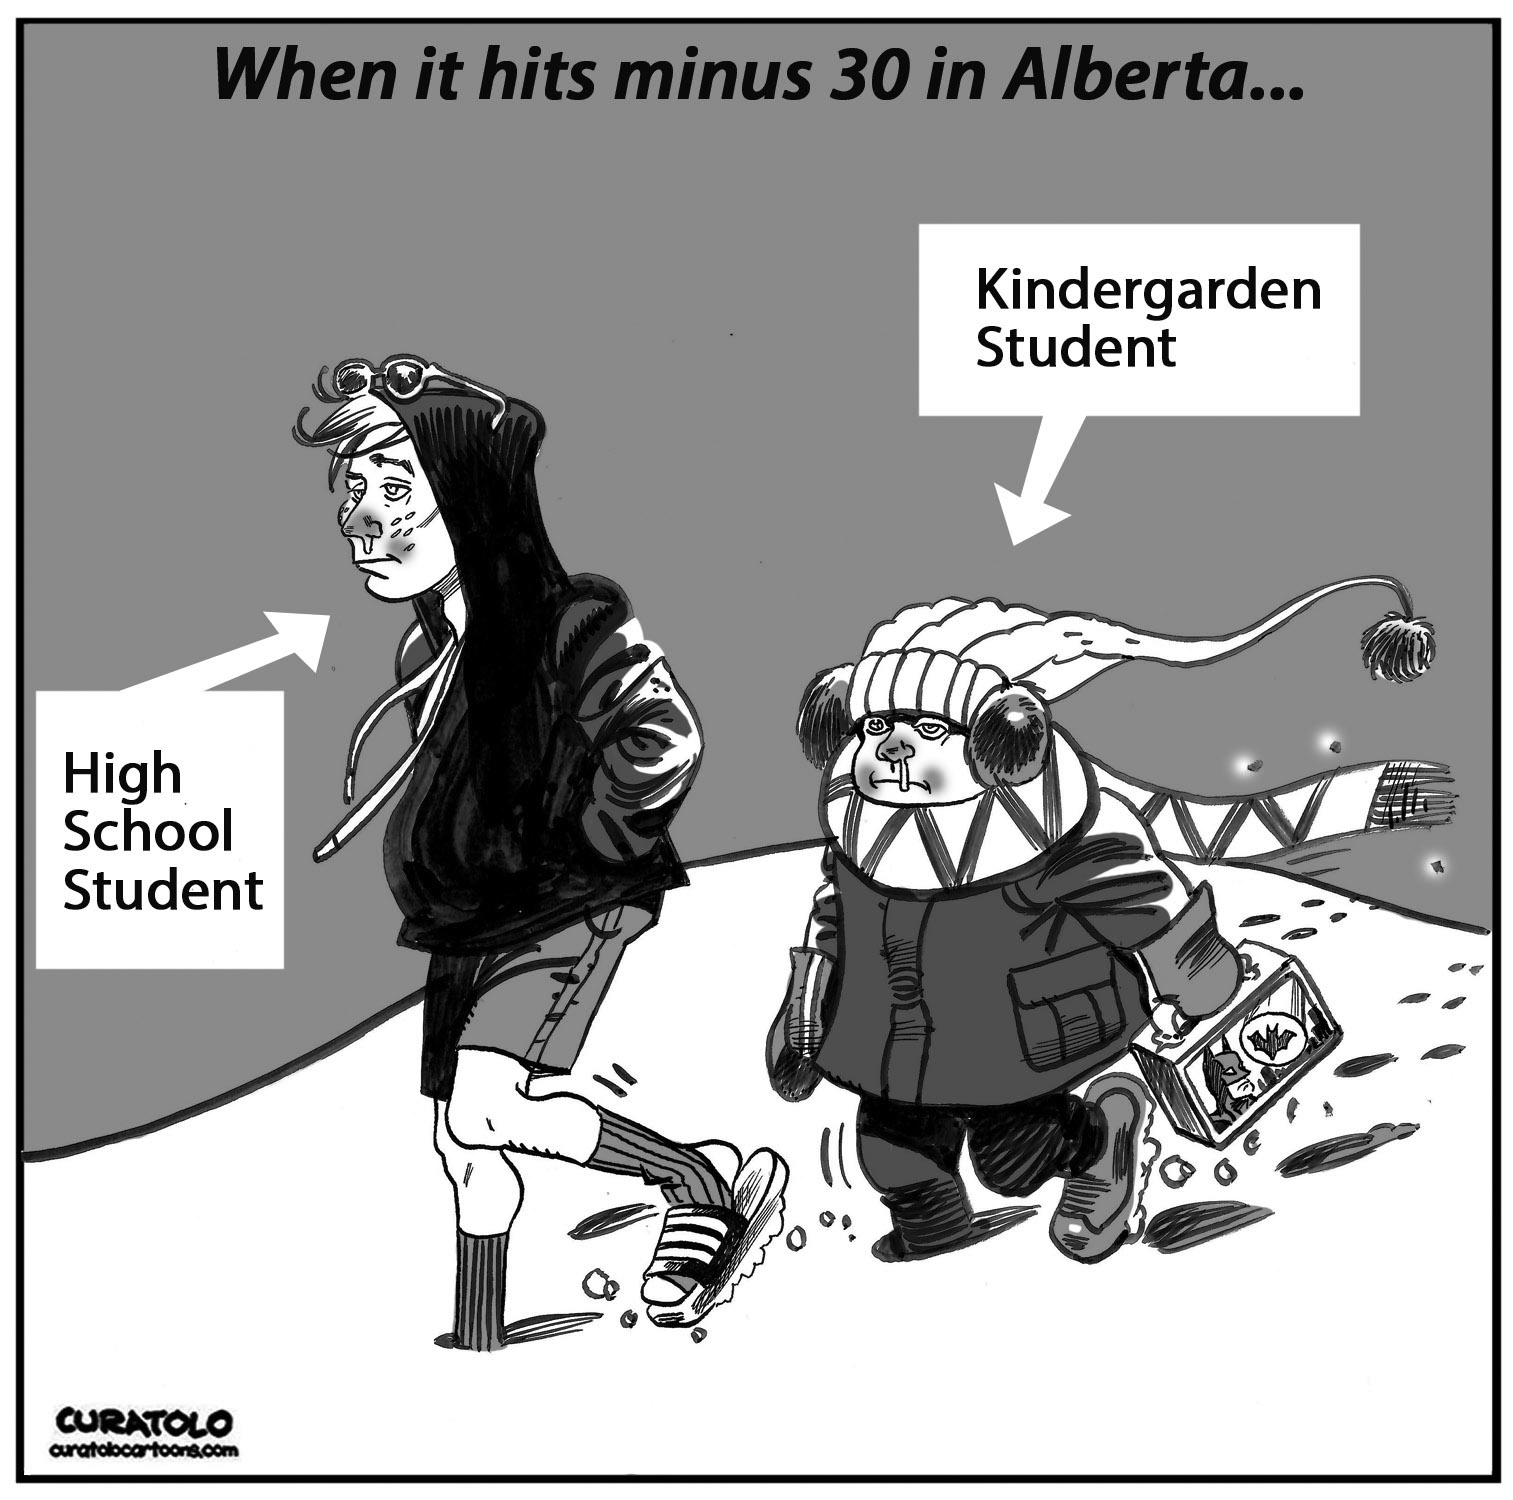 Two students walking in the snow. Arrows point to them individually. On the left is a "high school student" according to the arrow. The second student on the right is labeled "Kindergarten student." The title of the cartoon is "When it hits minus 30 in Alberta..." The high school student is wearing shorts and flip-flops in the snow. The kindergarten student is wearing all the winter gear, scarf, mittens, hat, ear muffs, etc.